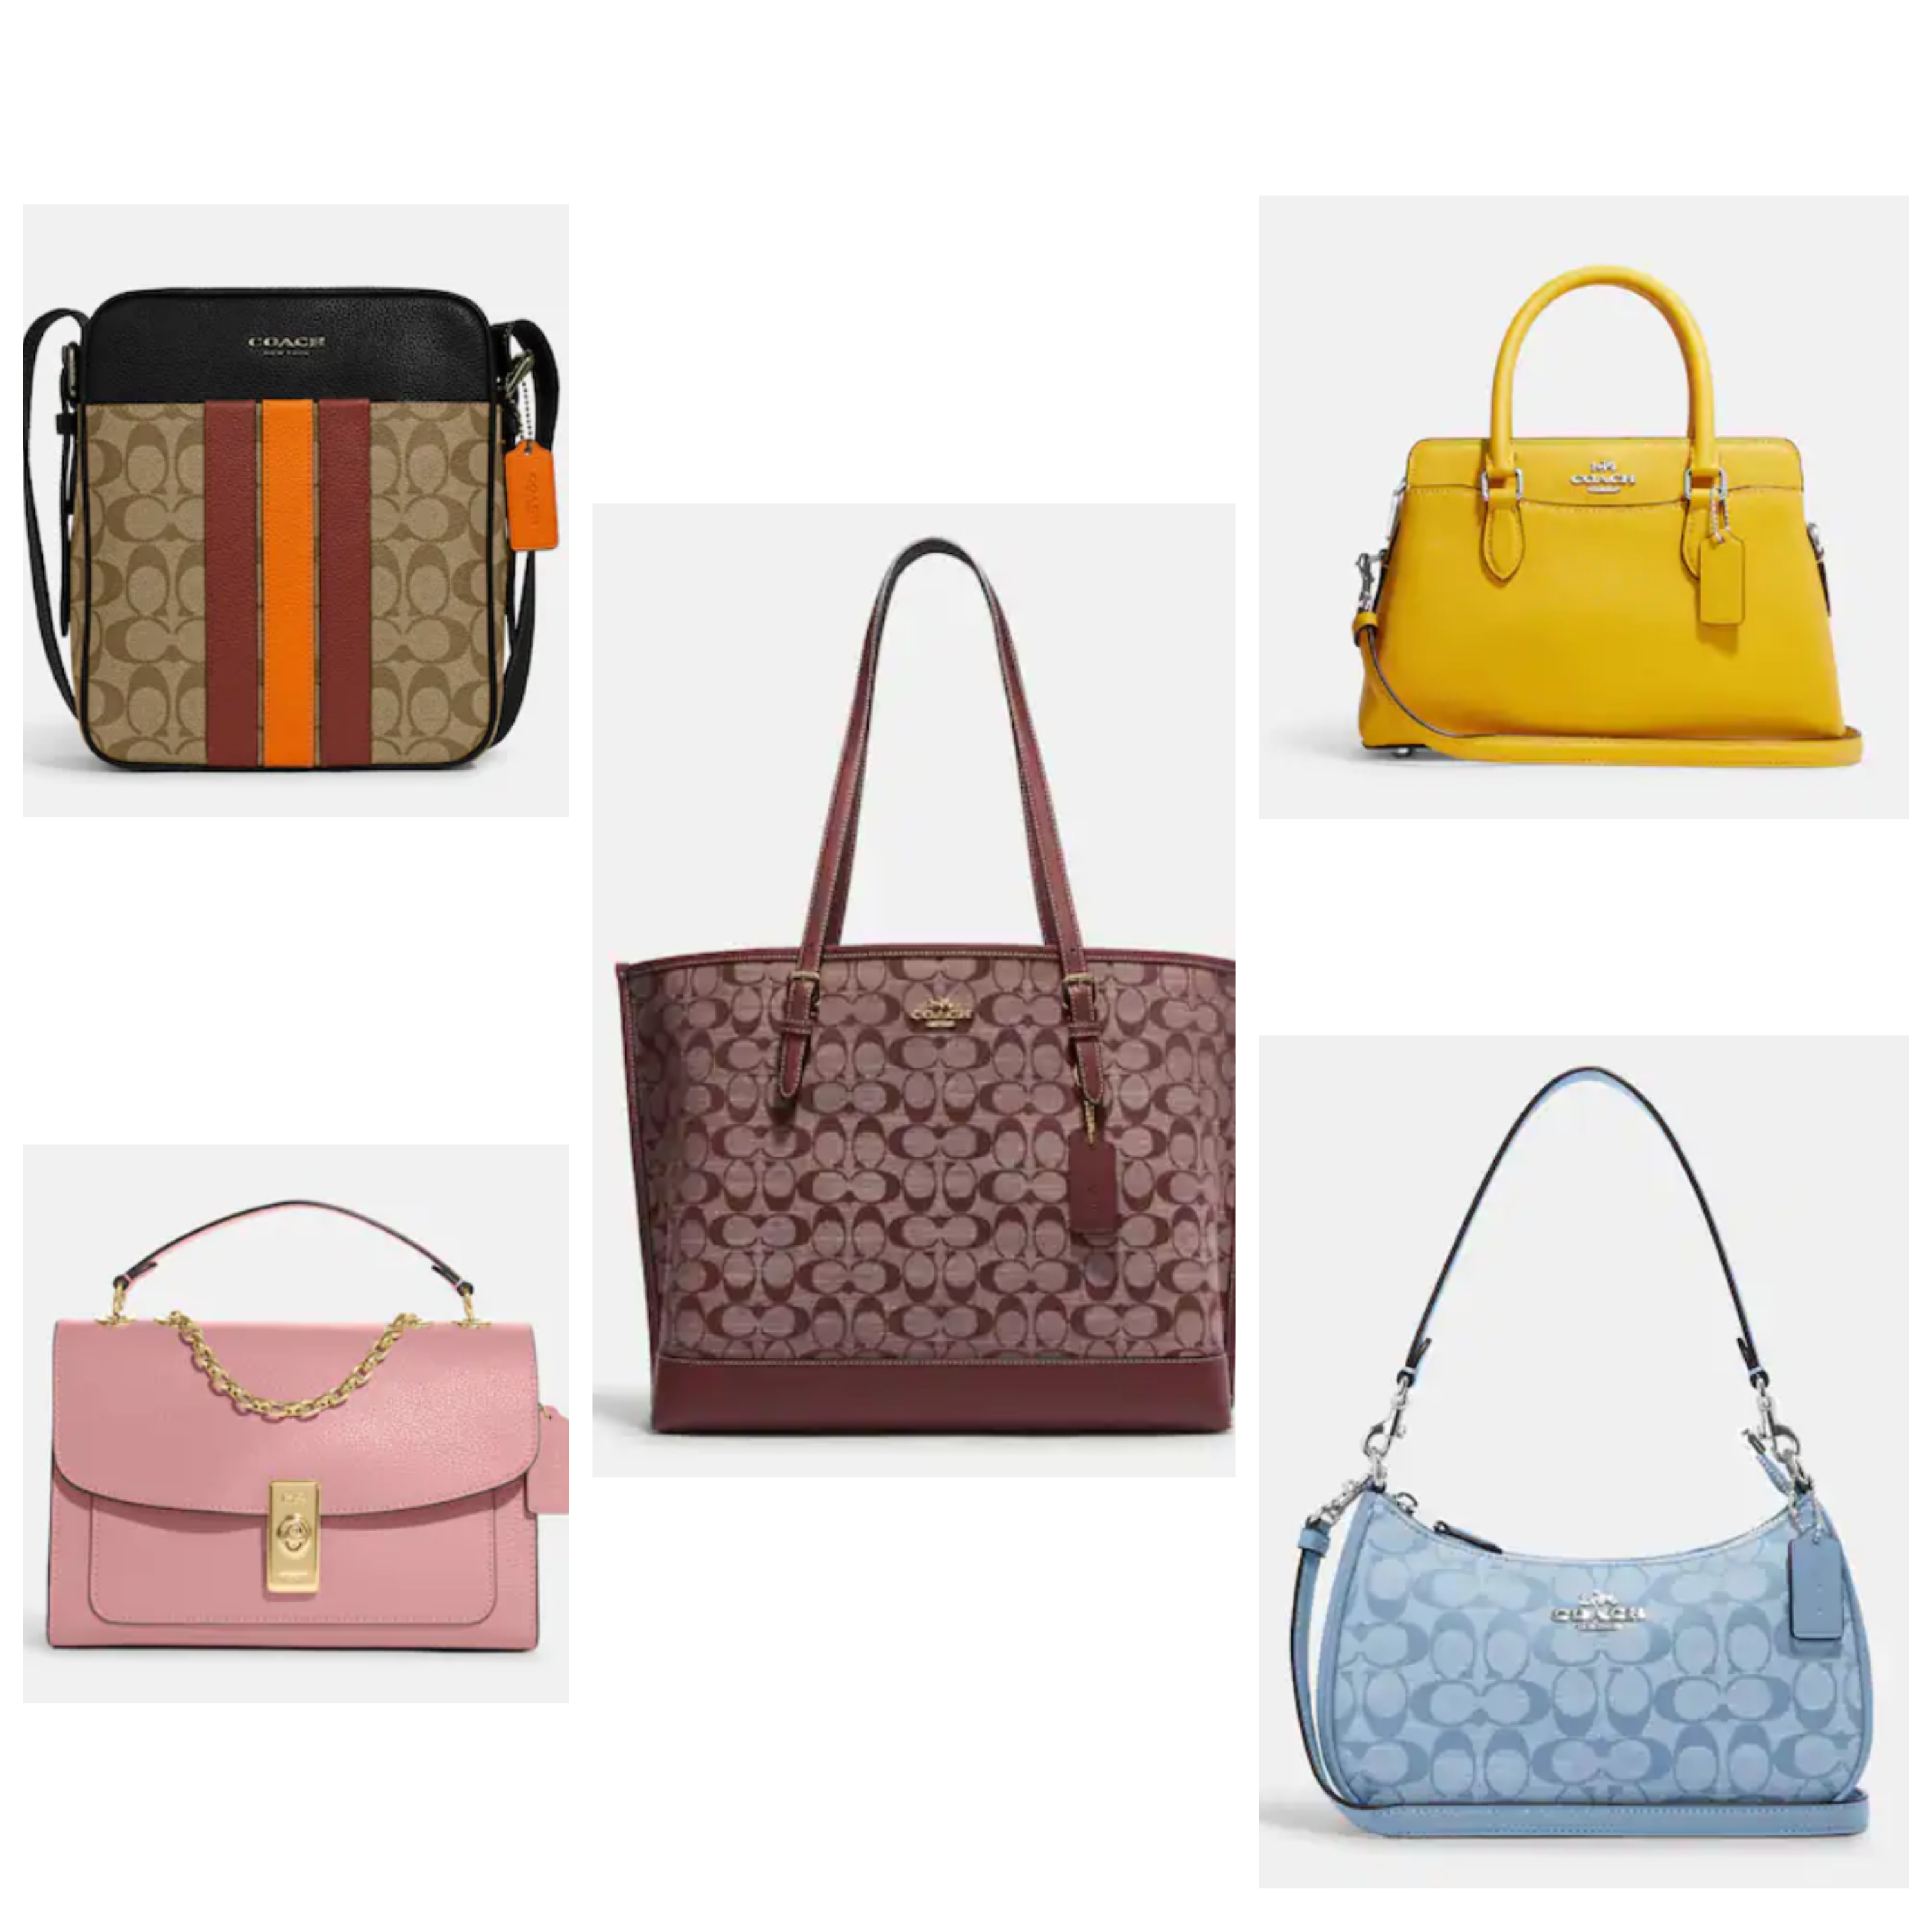 Second hand Designer Bags | Cheap Used Bags Sale UK | CSD